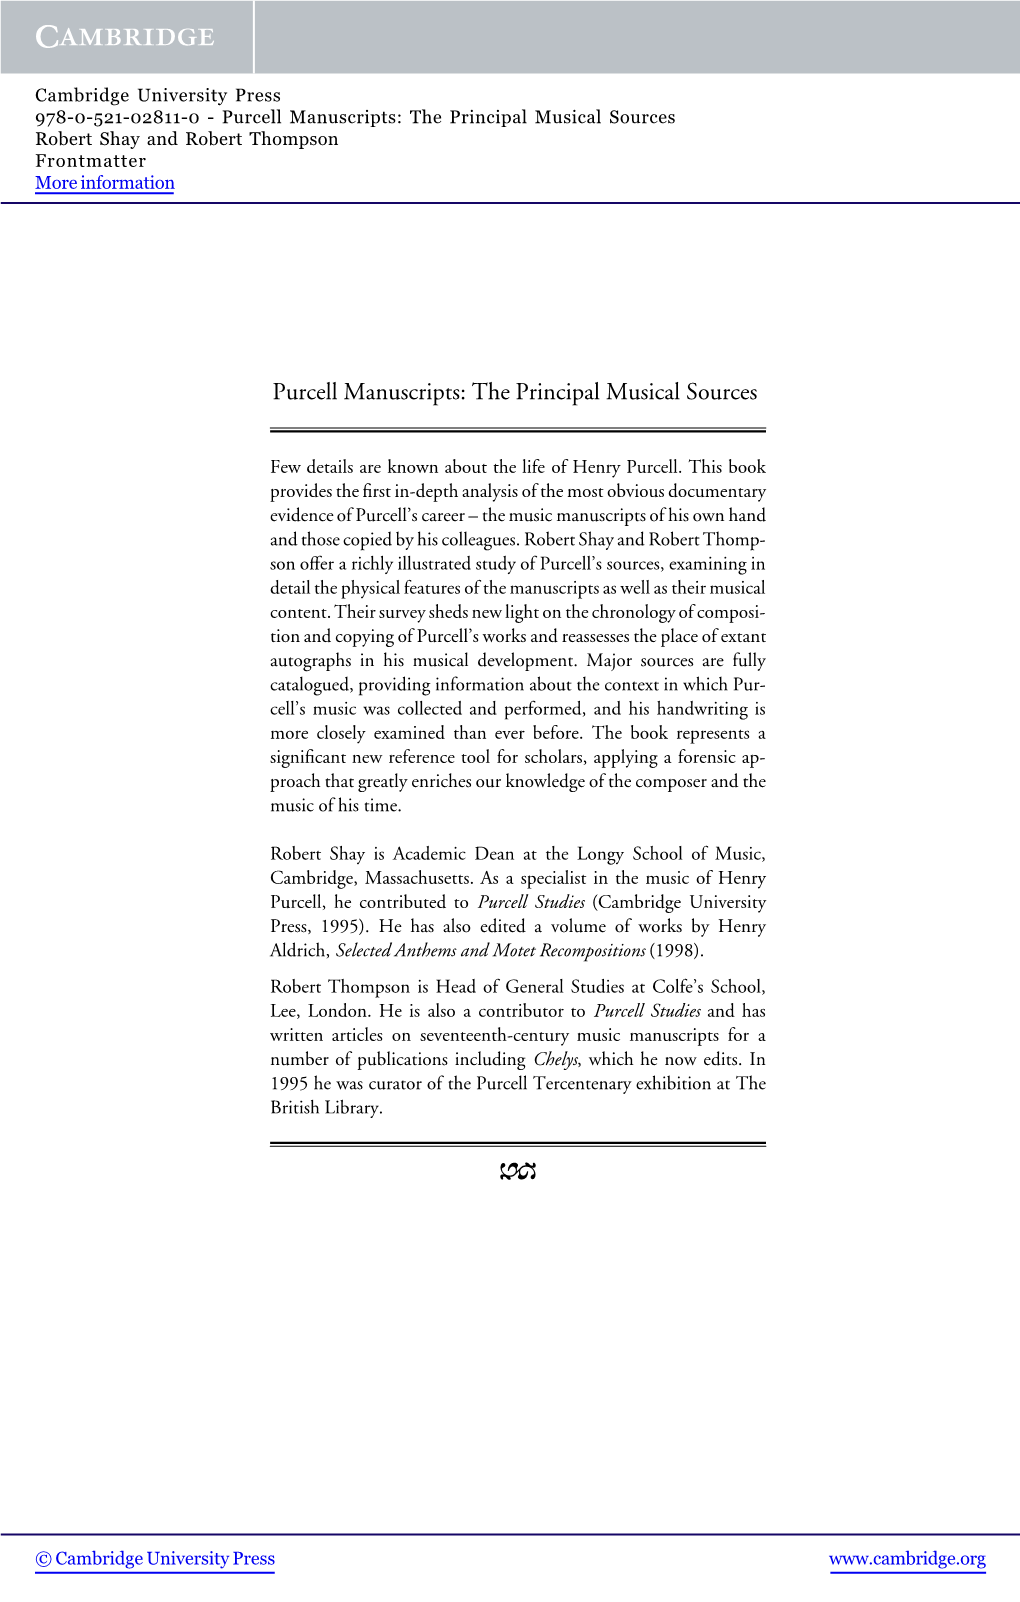 Purcell Manuscripts: the Principal Musical Sources Robert Shay and Robert Thompson Frontmatter More Information